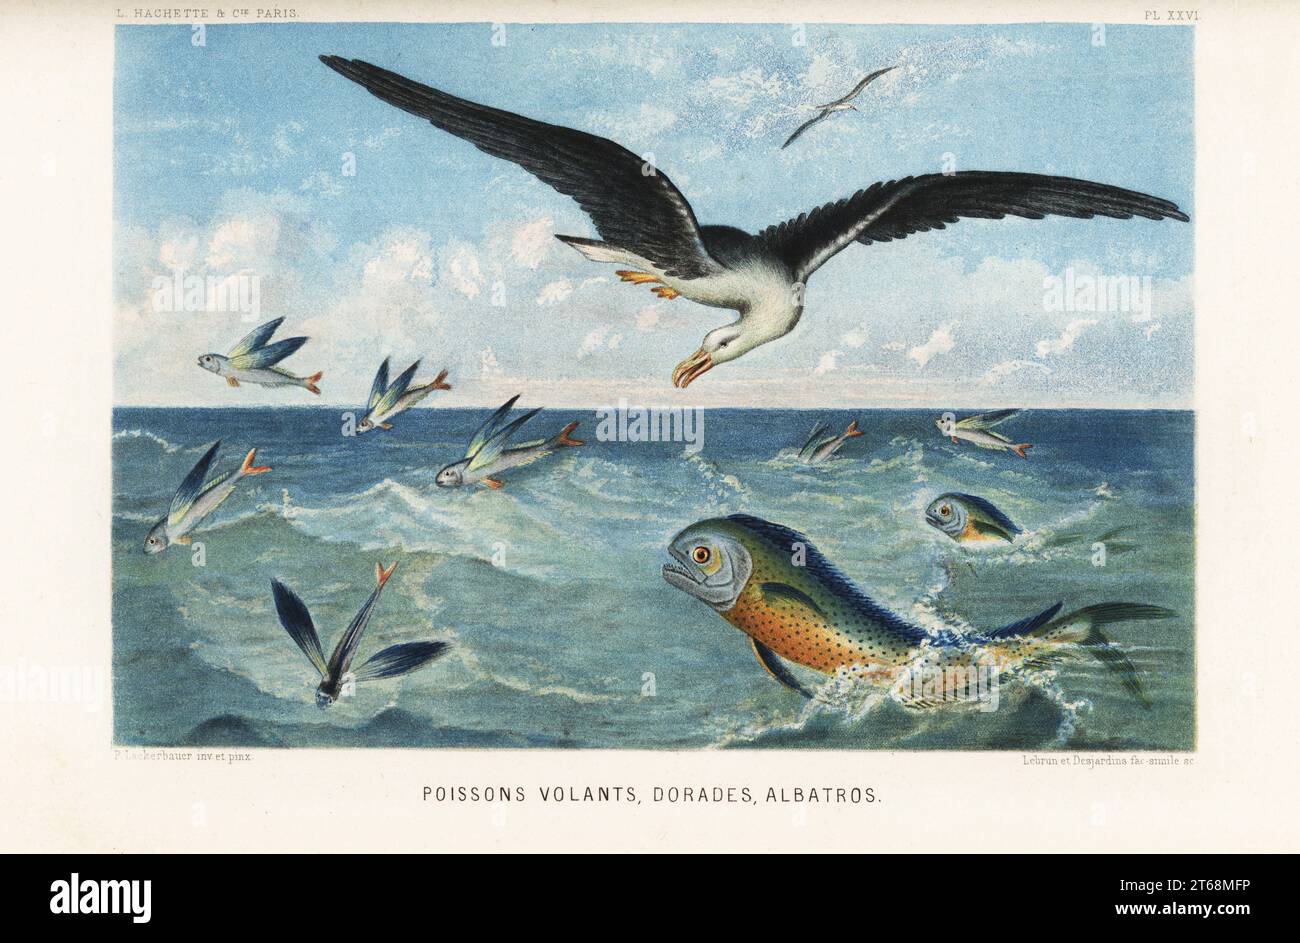 Flying fish, Exocoetus volitans, gilt-head sea bream, Sparus aurata, and albatross, Diomedea exulans. Poissons volants, dorades, albatros. Chromolithograph by Lebrun and Desjardins after Pierre Lackerbauer from Alfred Fredols Le Monde de la Mer, the World of the Sea, edited by Olivier Fredol, Librairie Hachette et. Cie., Paris, 1881. Alfred Fredol was the pseudonym of French zoologist and botanist Alfred Moquin-Tandon, 1804-1863. Stock Photo